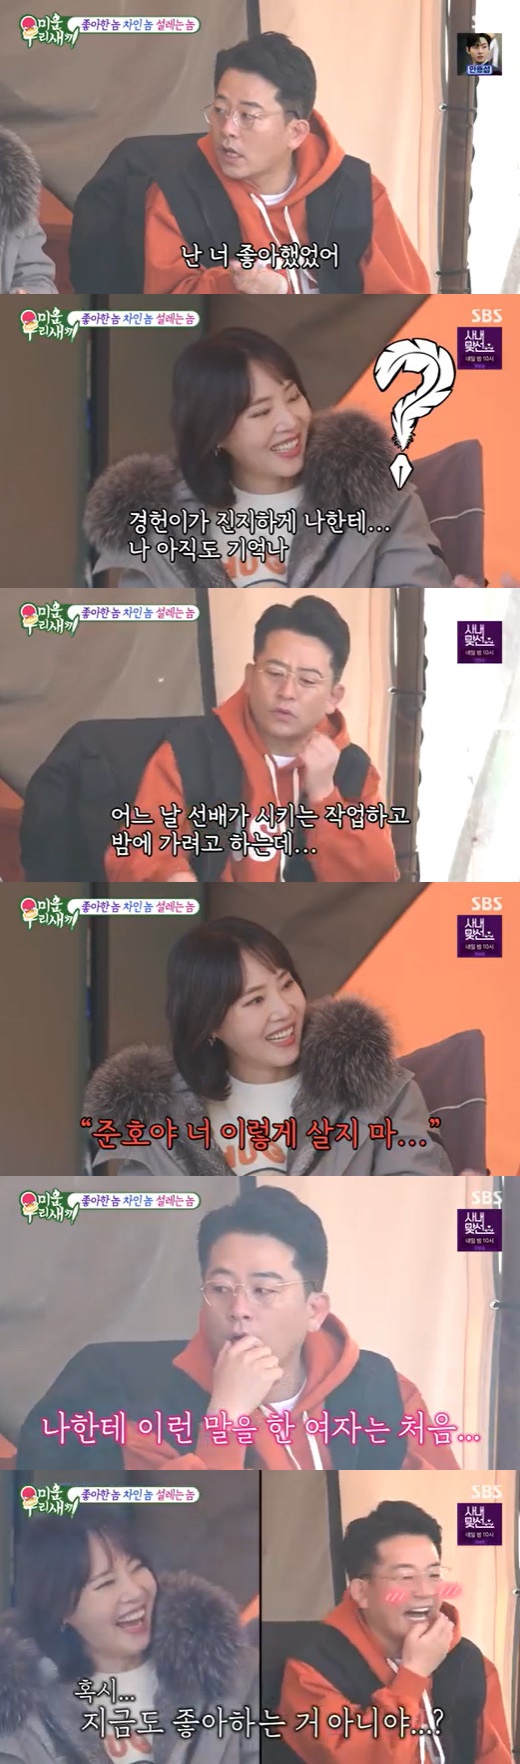 In My Little Old Boy, comedian Kim Jun-ho liked college alumni talent Kyeong-heon Kang, Confessions said.On the afternoon of the 27th, SBS My Little Old Boy depicted Kim Jun-ho, Yoon Ki-won, and Kyeong-heon Kang who came to play at the campsite of Lim.On this day, Kim Jun-ho attracted Eye-catching by Confessions, saying, I liked (Kang) Kyung Heon in the appearance of Kyeong-heon Kang, an alumni of Dankook University.He said, When I was in school, Kyungheon was originally popular. Why did you like it?Kim Jun-ho said, I am going to work with my seniors at that time and go to the night, but I still remember what Kyung-heon gave me seriously.Kyung-heon said, You always drink, you spend your house money, and you do not live like this. Ive never heard of that. Kyung Heon suggested that I learn pantomime together. I learned to walk slowly. It was boring, but he liked it, so I pretended to learn hard.